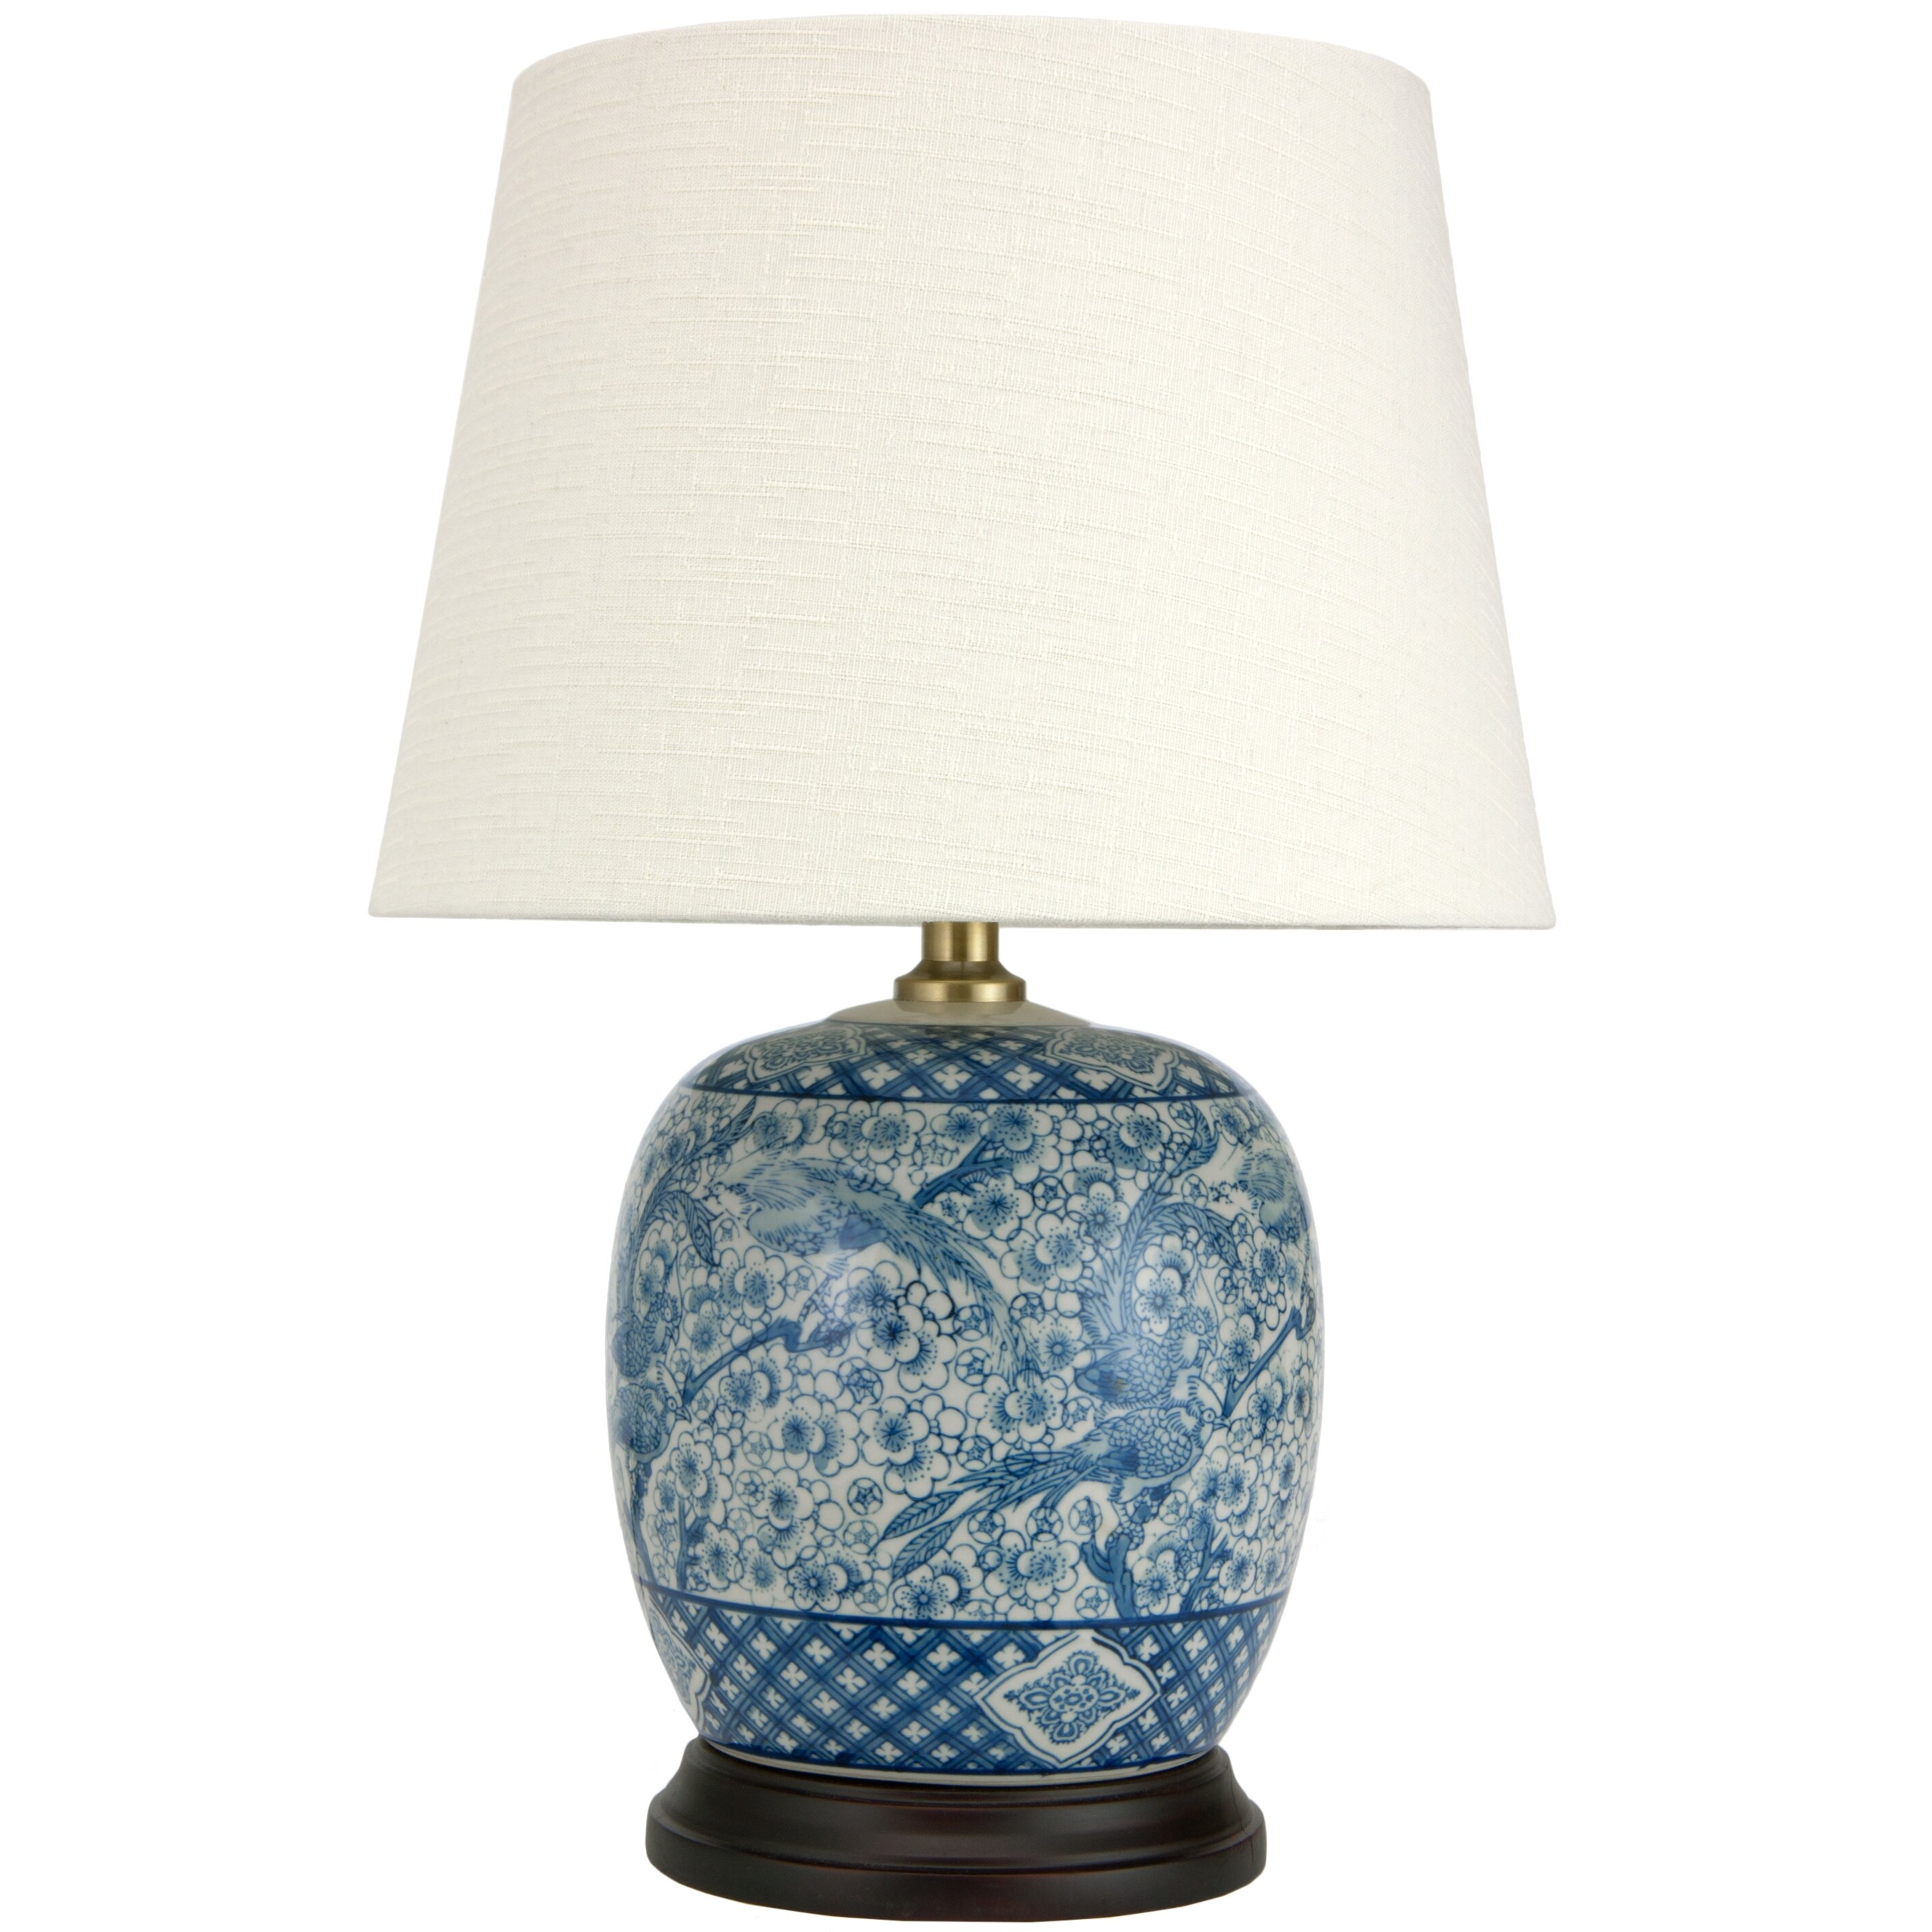 Classic 20" H Table Lamp with Empire Shade